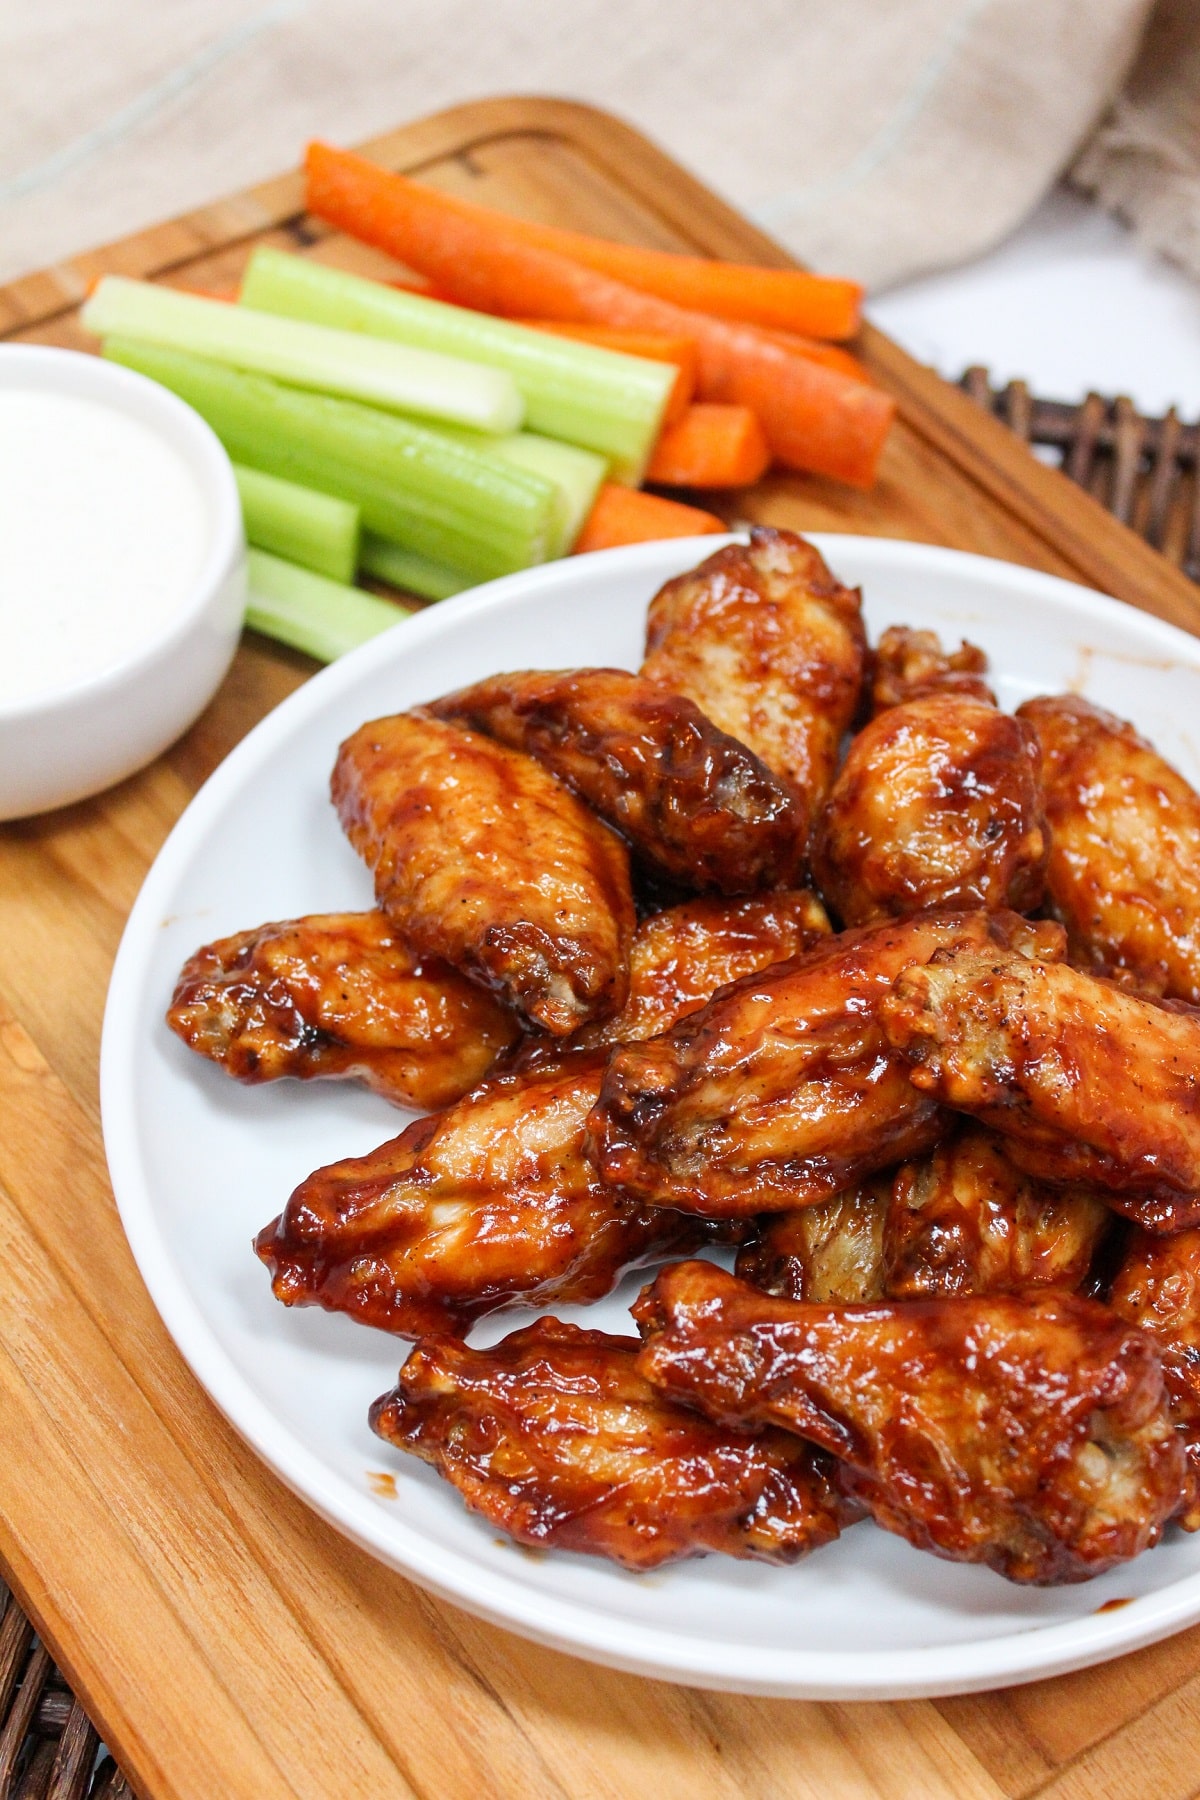 cooked wings in bbq sauce piled on a white plate. Sliced carrots and celery on the side with ranch dressing.